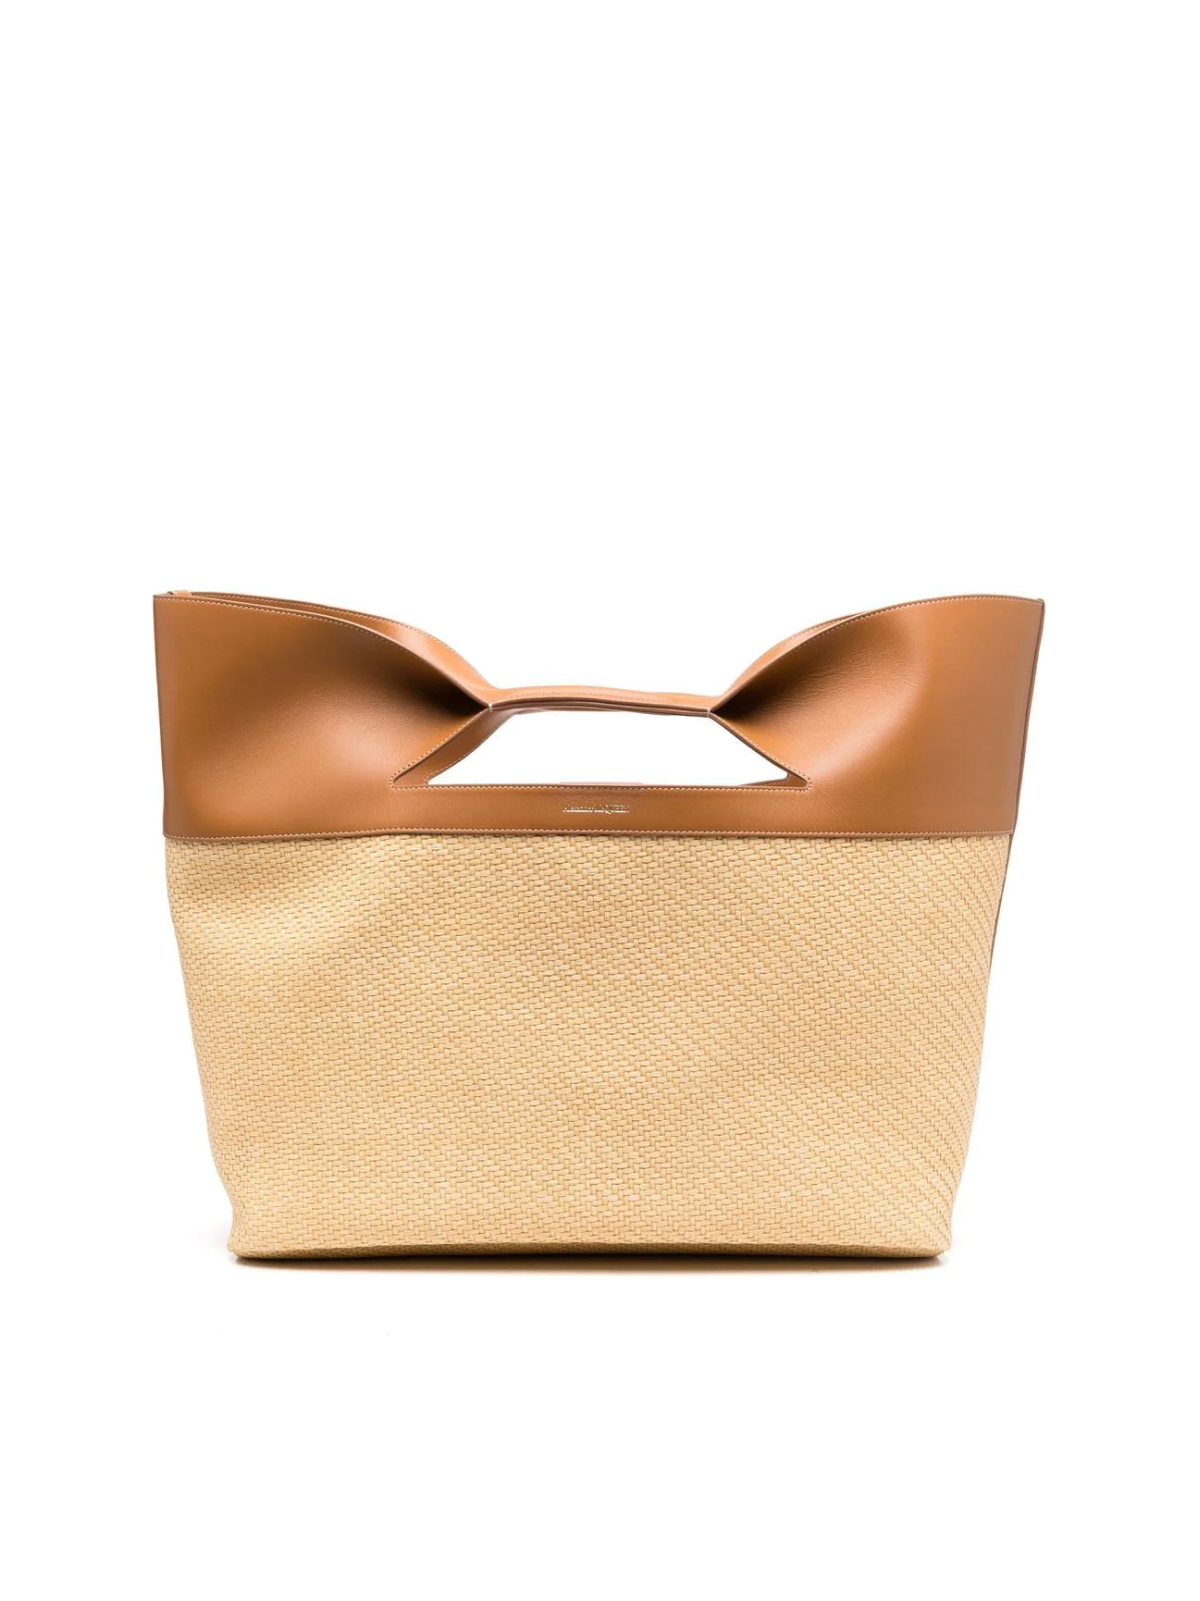 The Bow Tote Bag